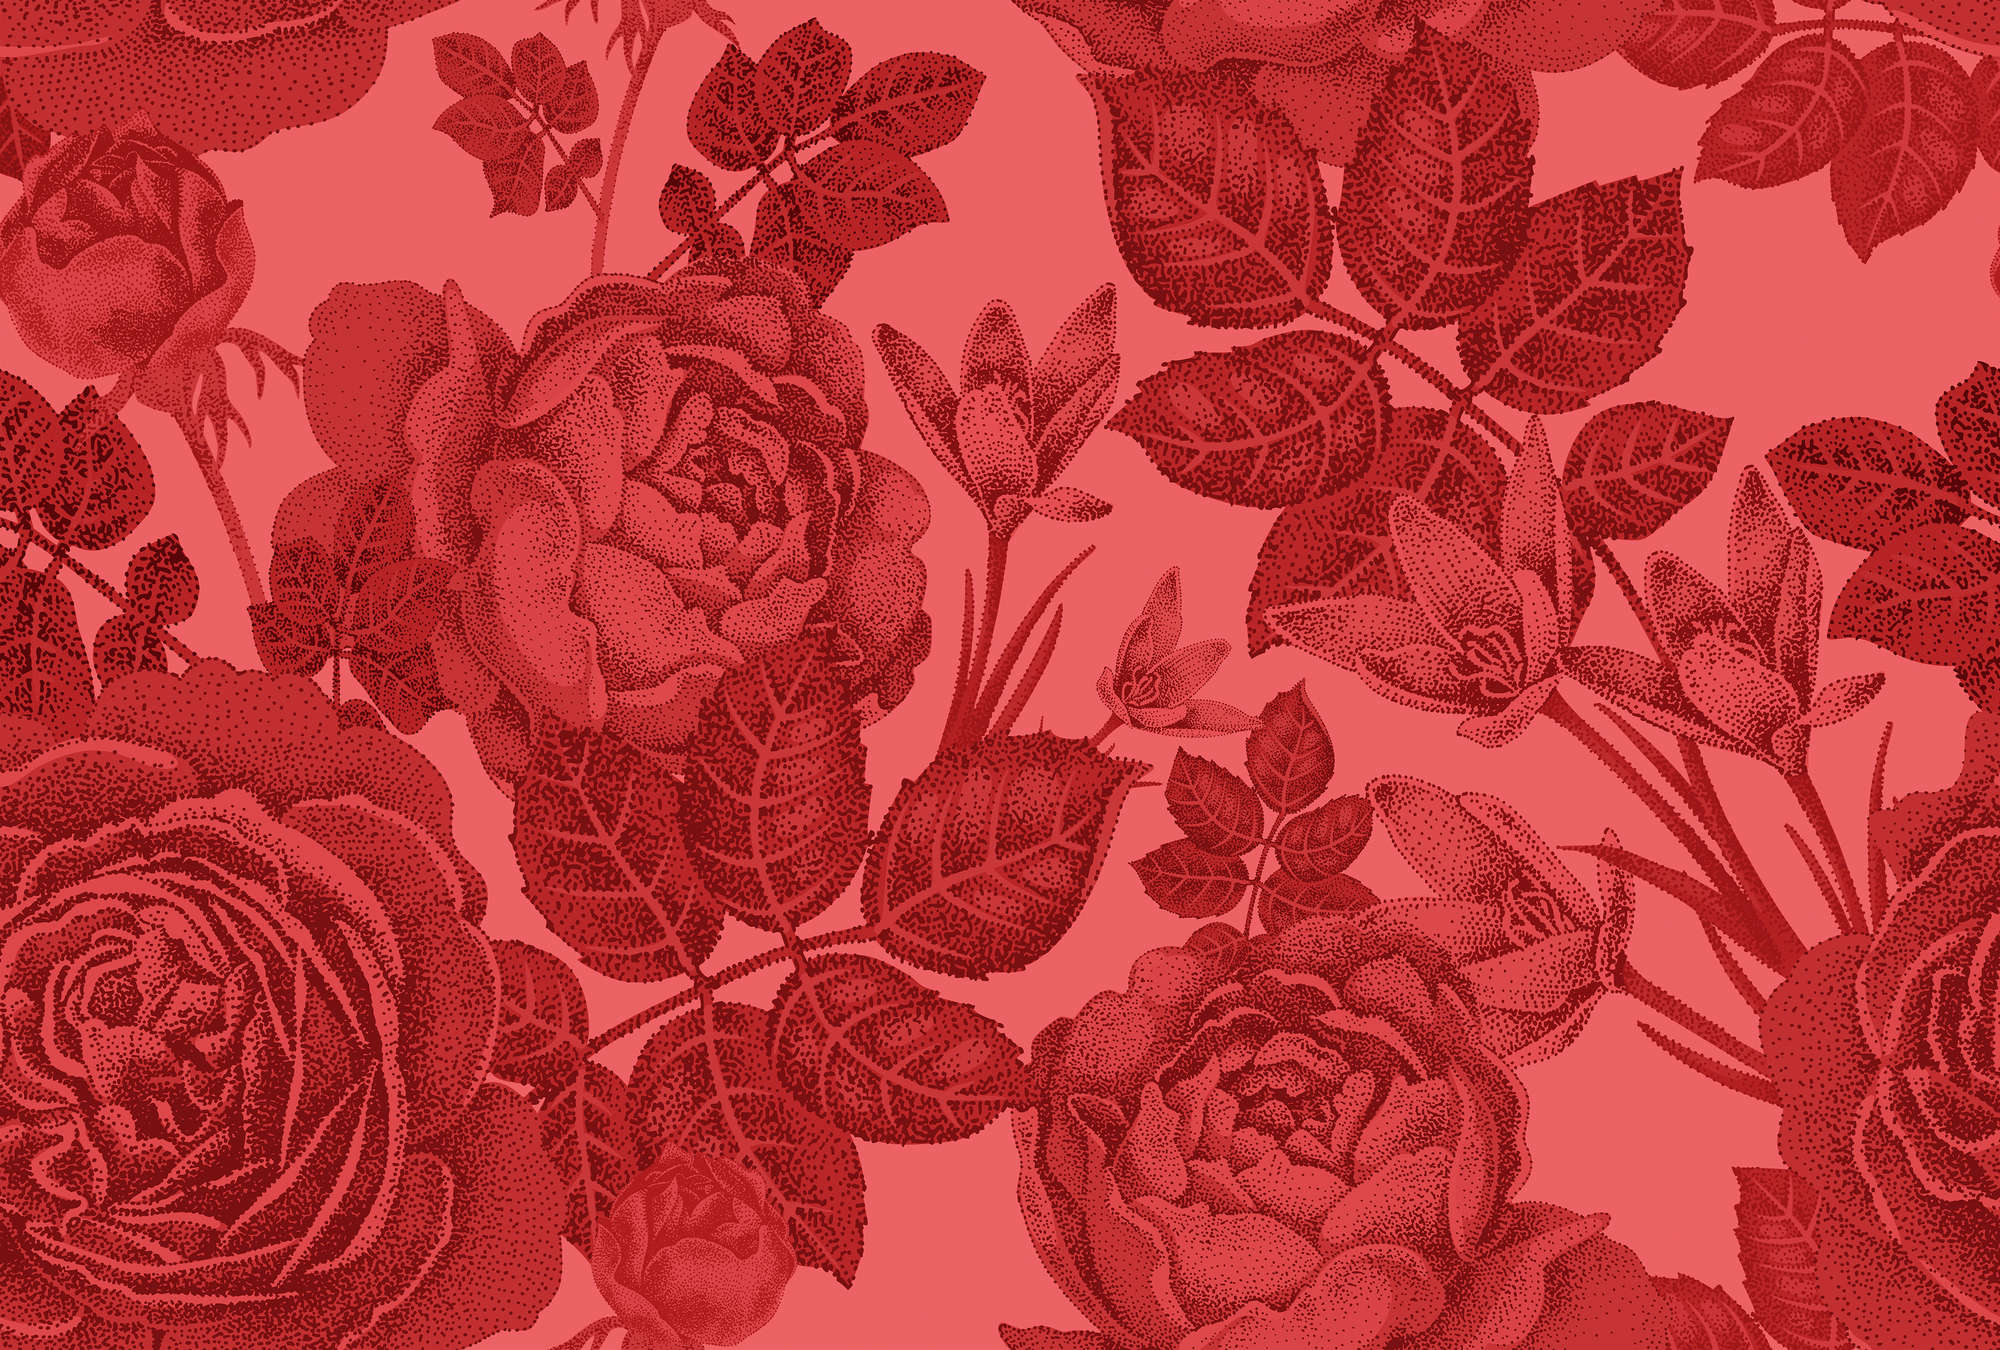             Floral mural roses on a bush - red
        